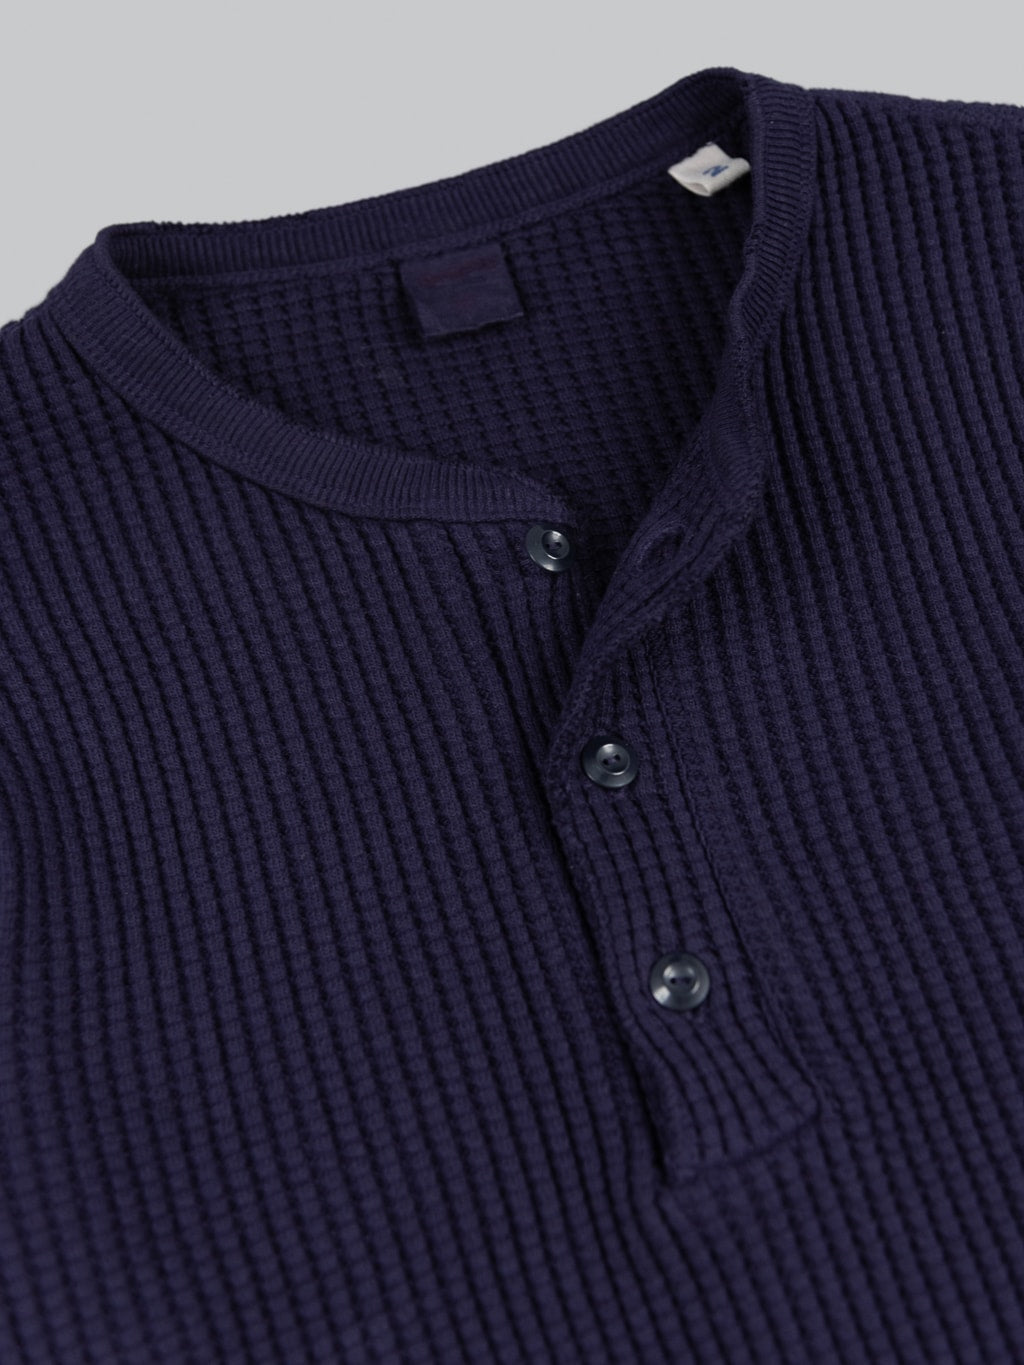 UES Thermal Waffle Long Sleeve Henley Navy open collar buttons